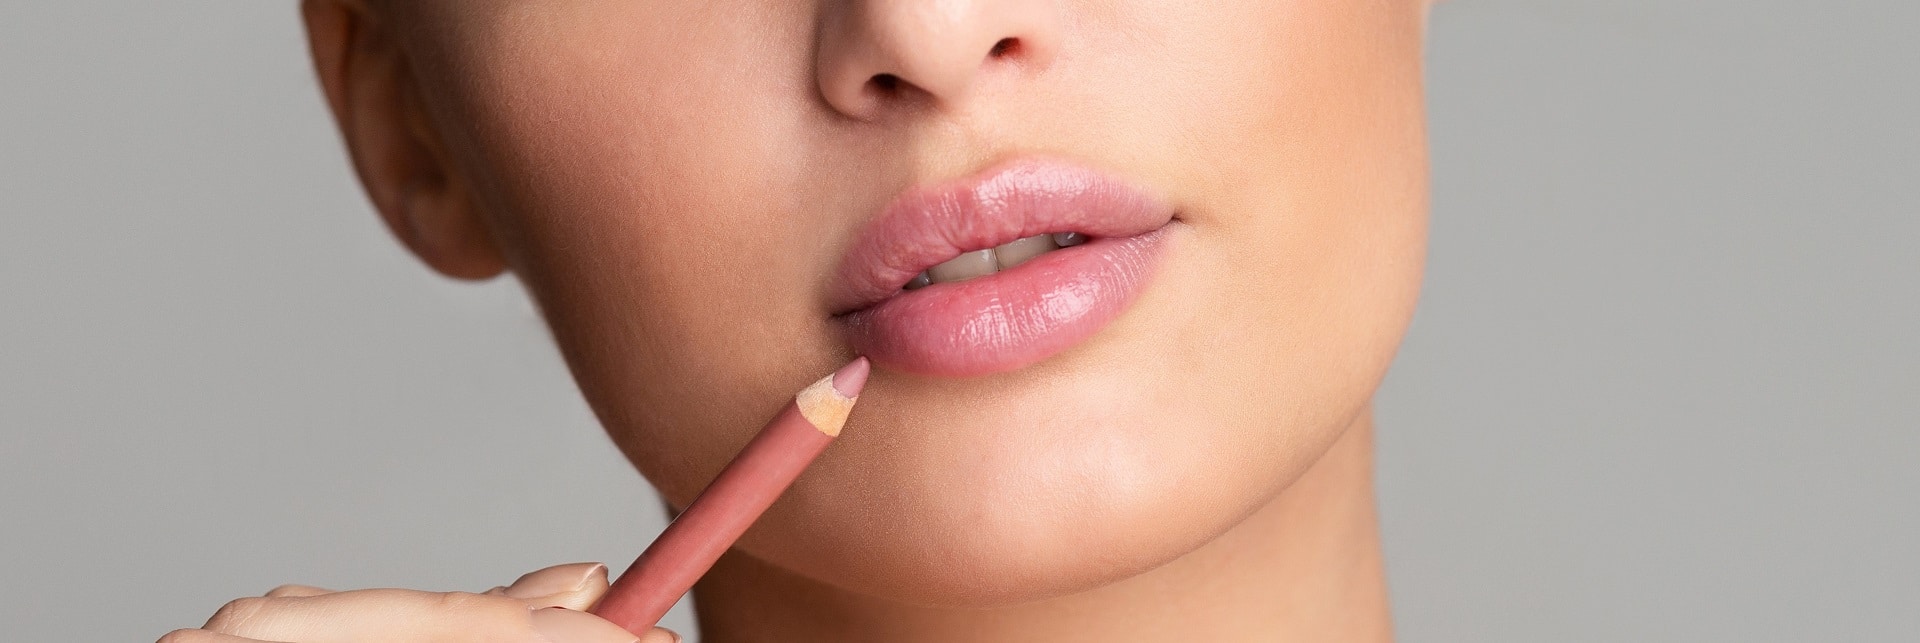 Botox Lip Flip Explained 10 Things You Need To Know